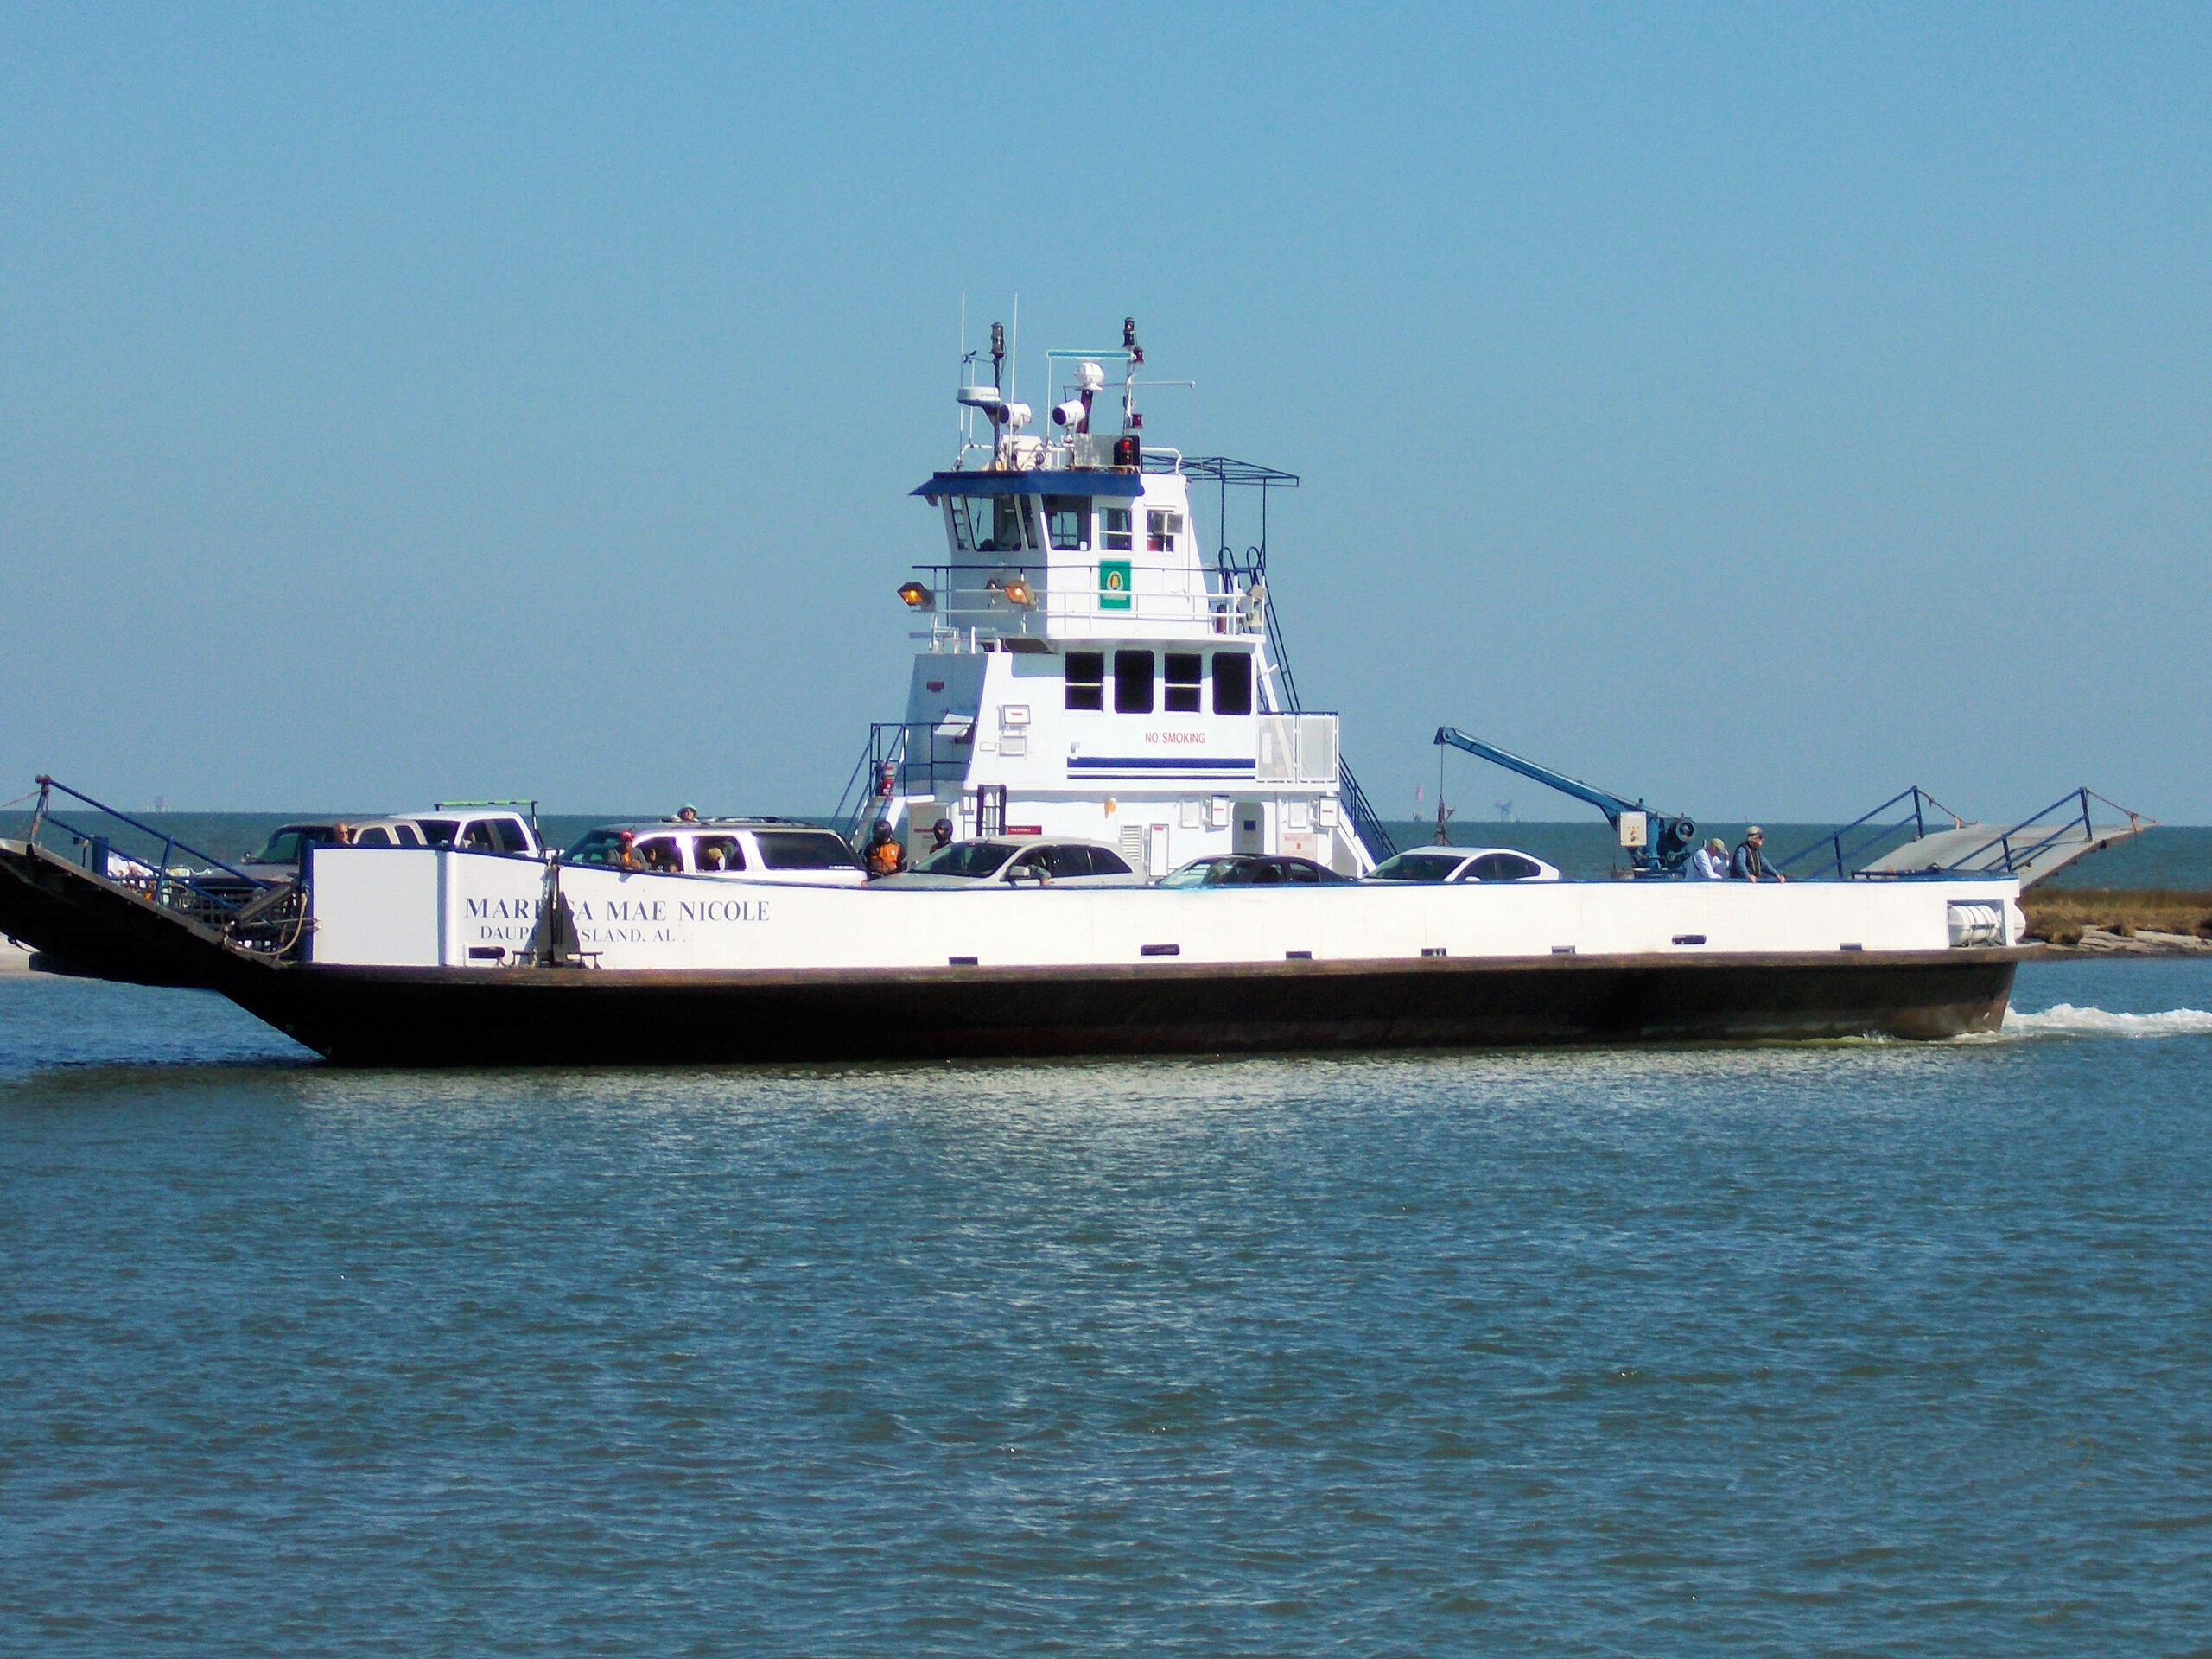 Picture of the Dauphin Island ferry taking people across Mobile Bay